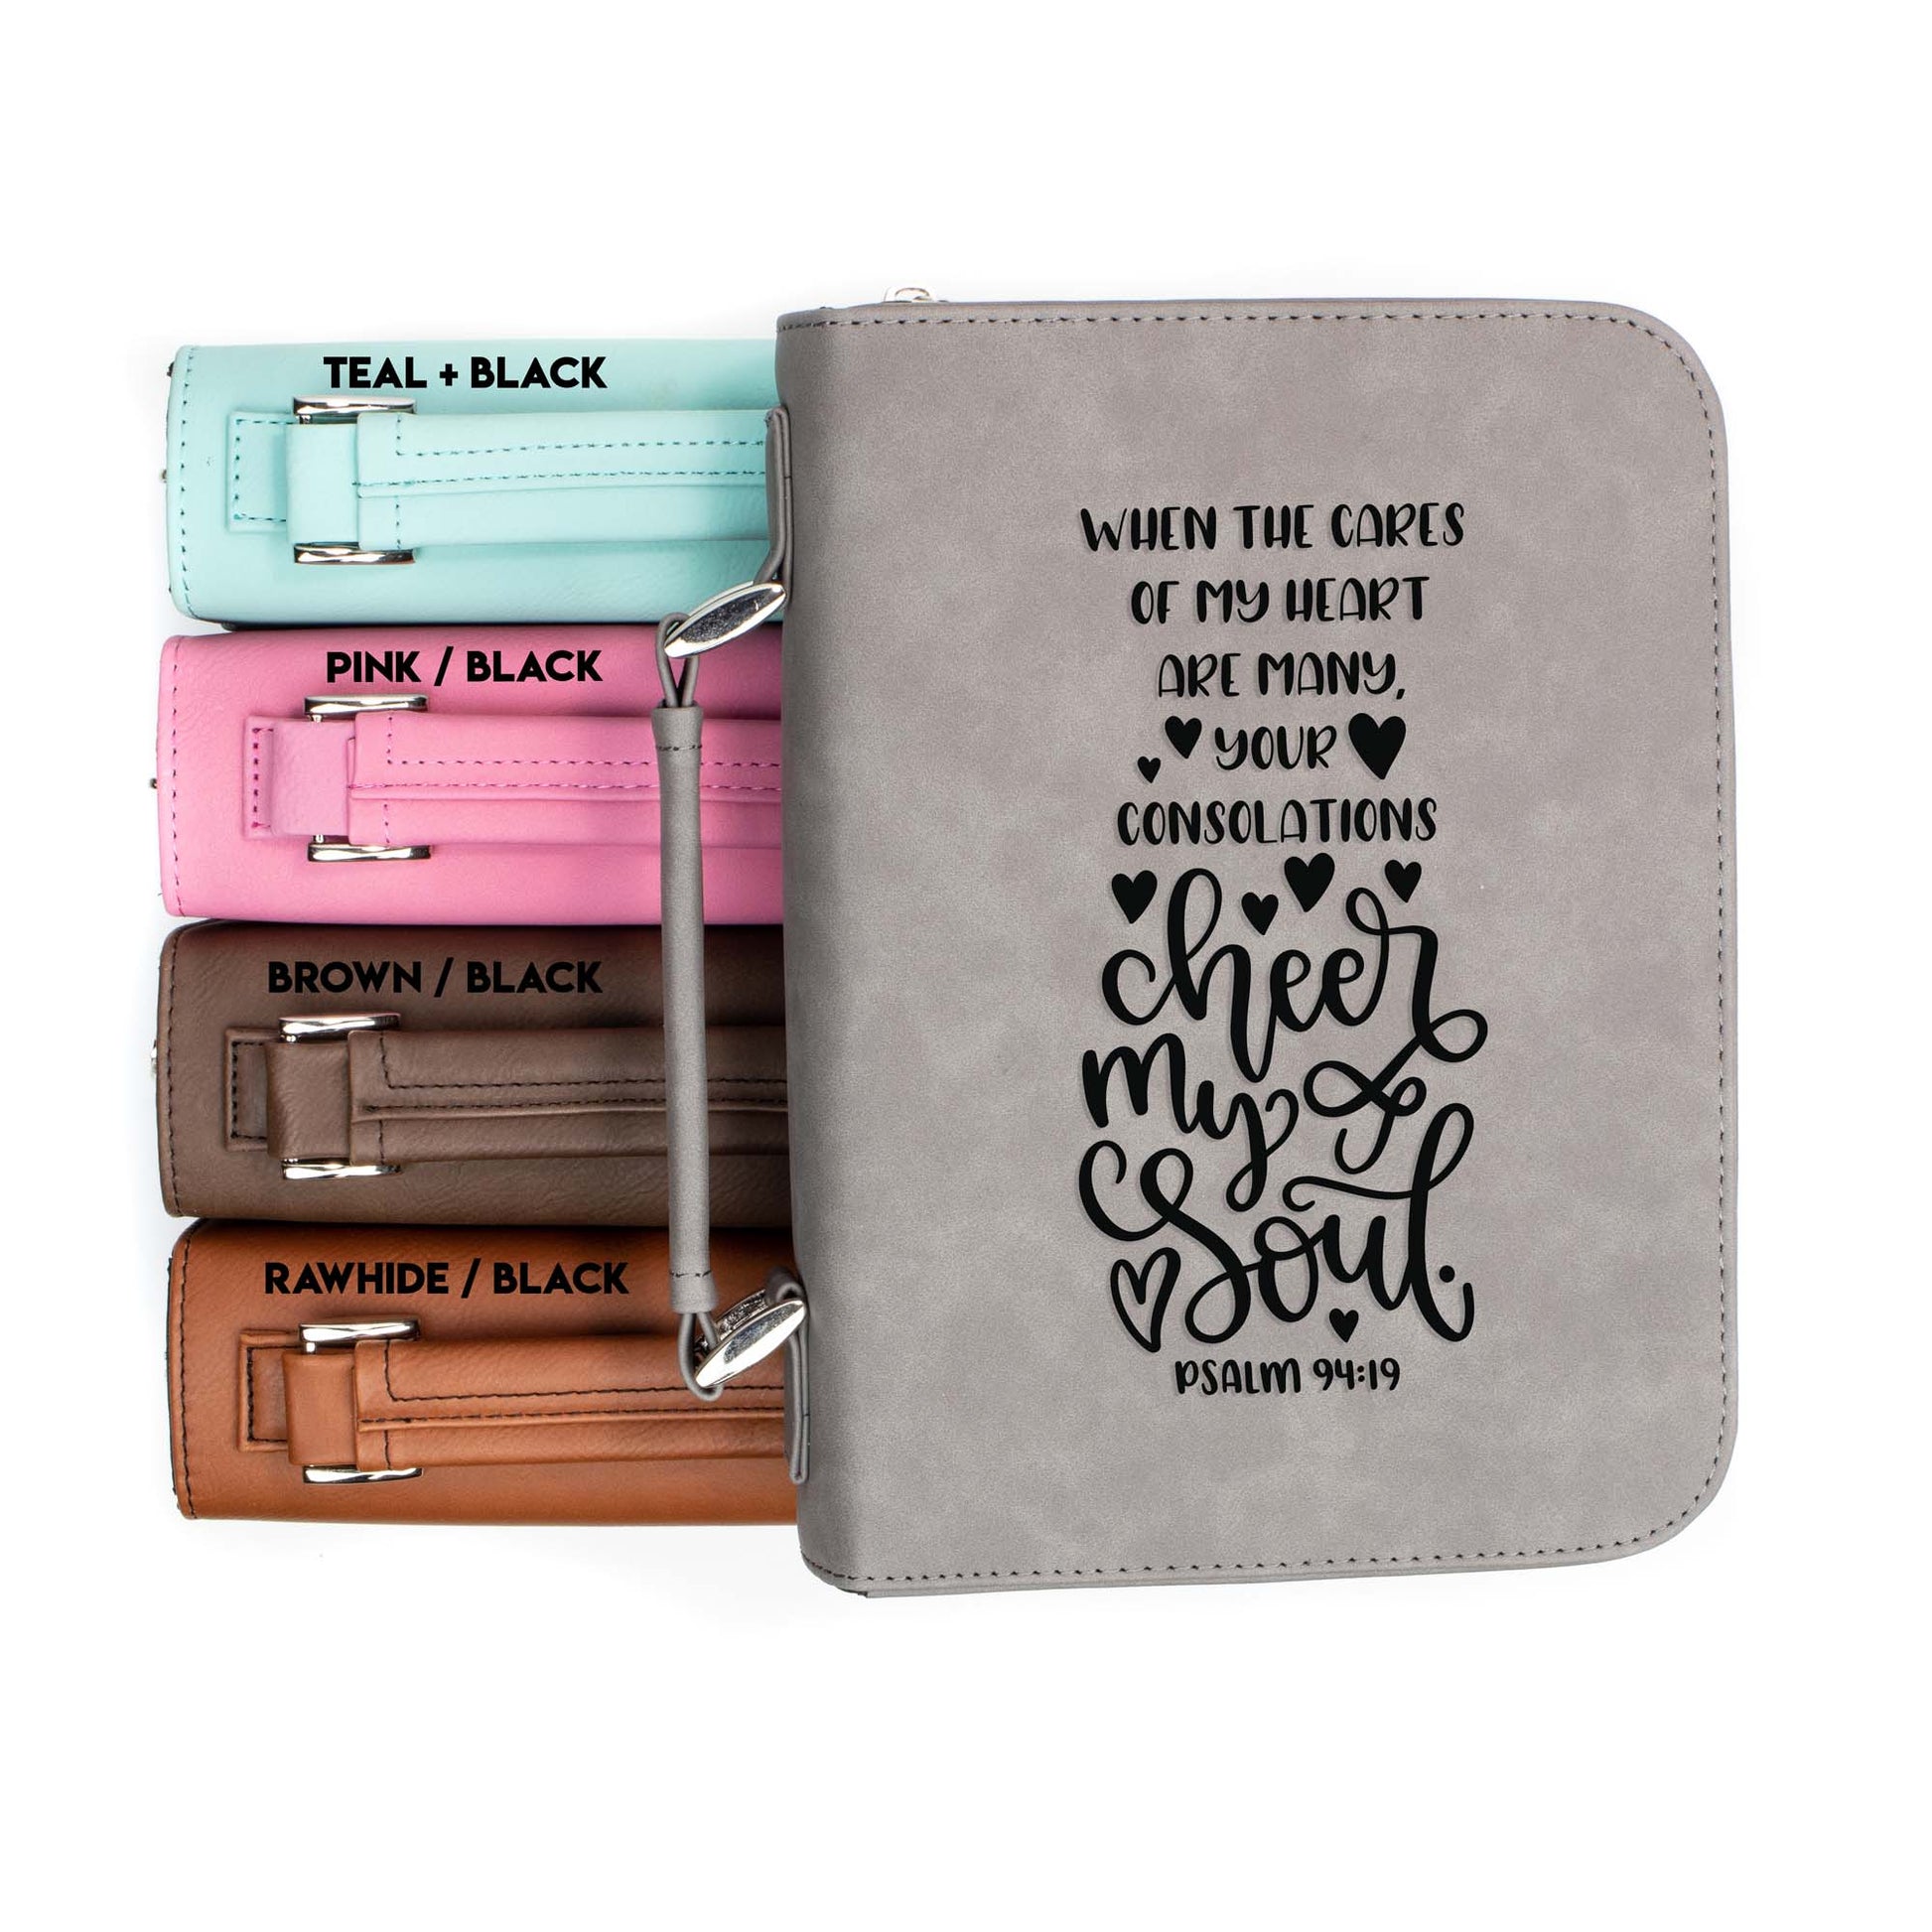 Cheer My Soul Psalm 94-19 Bible Cover | Faux Leather With Handle + Pockets